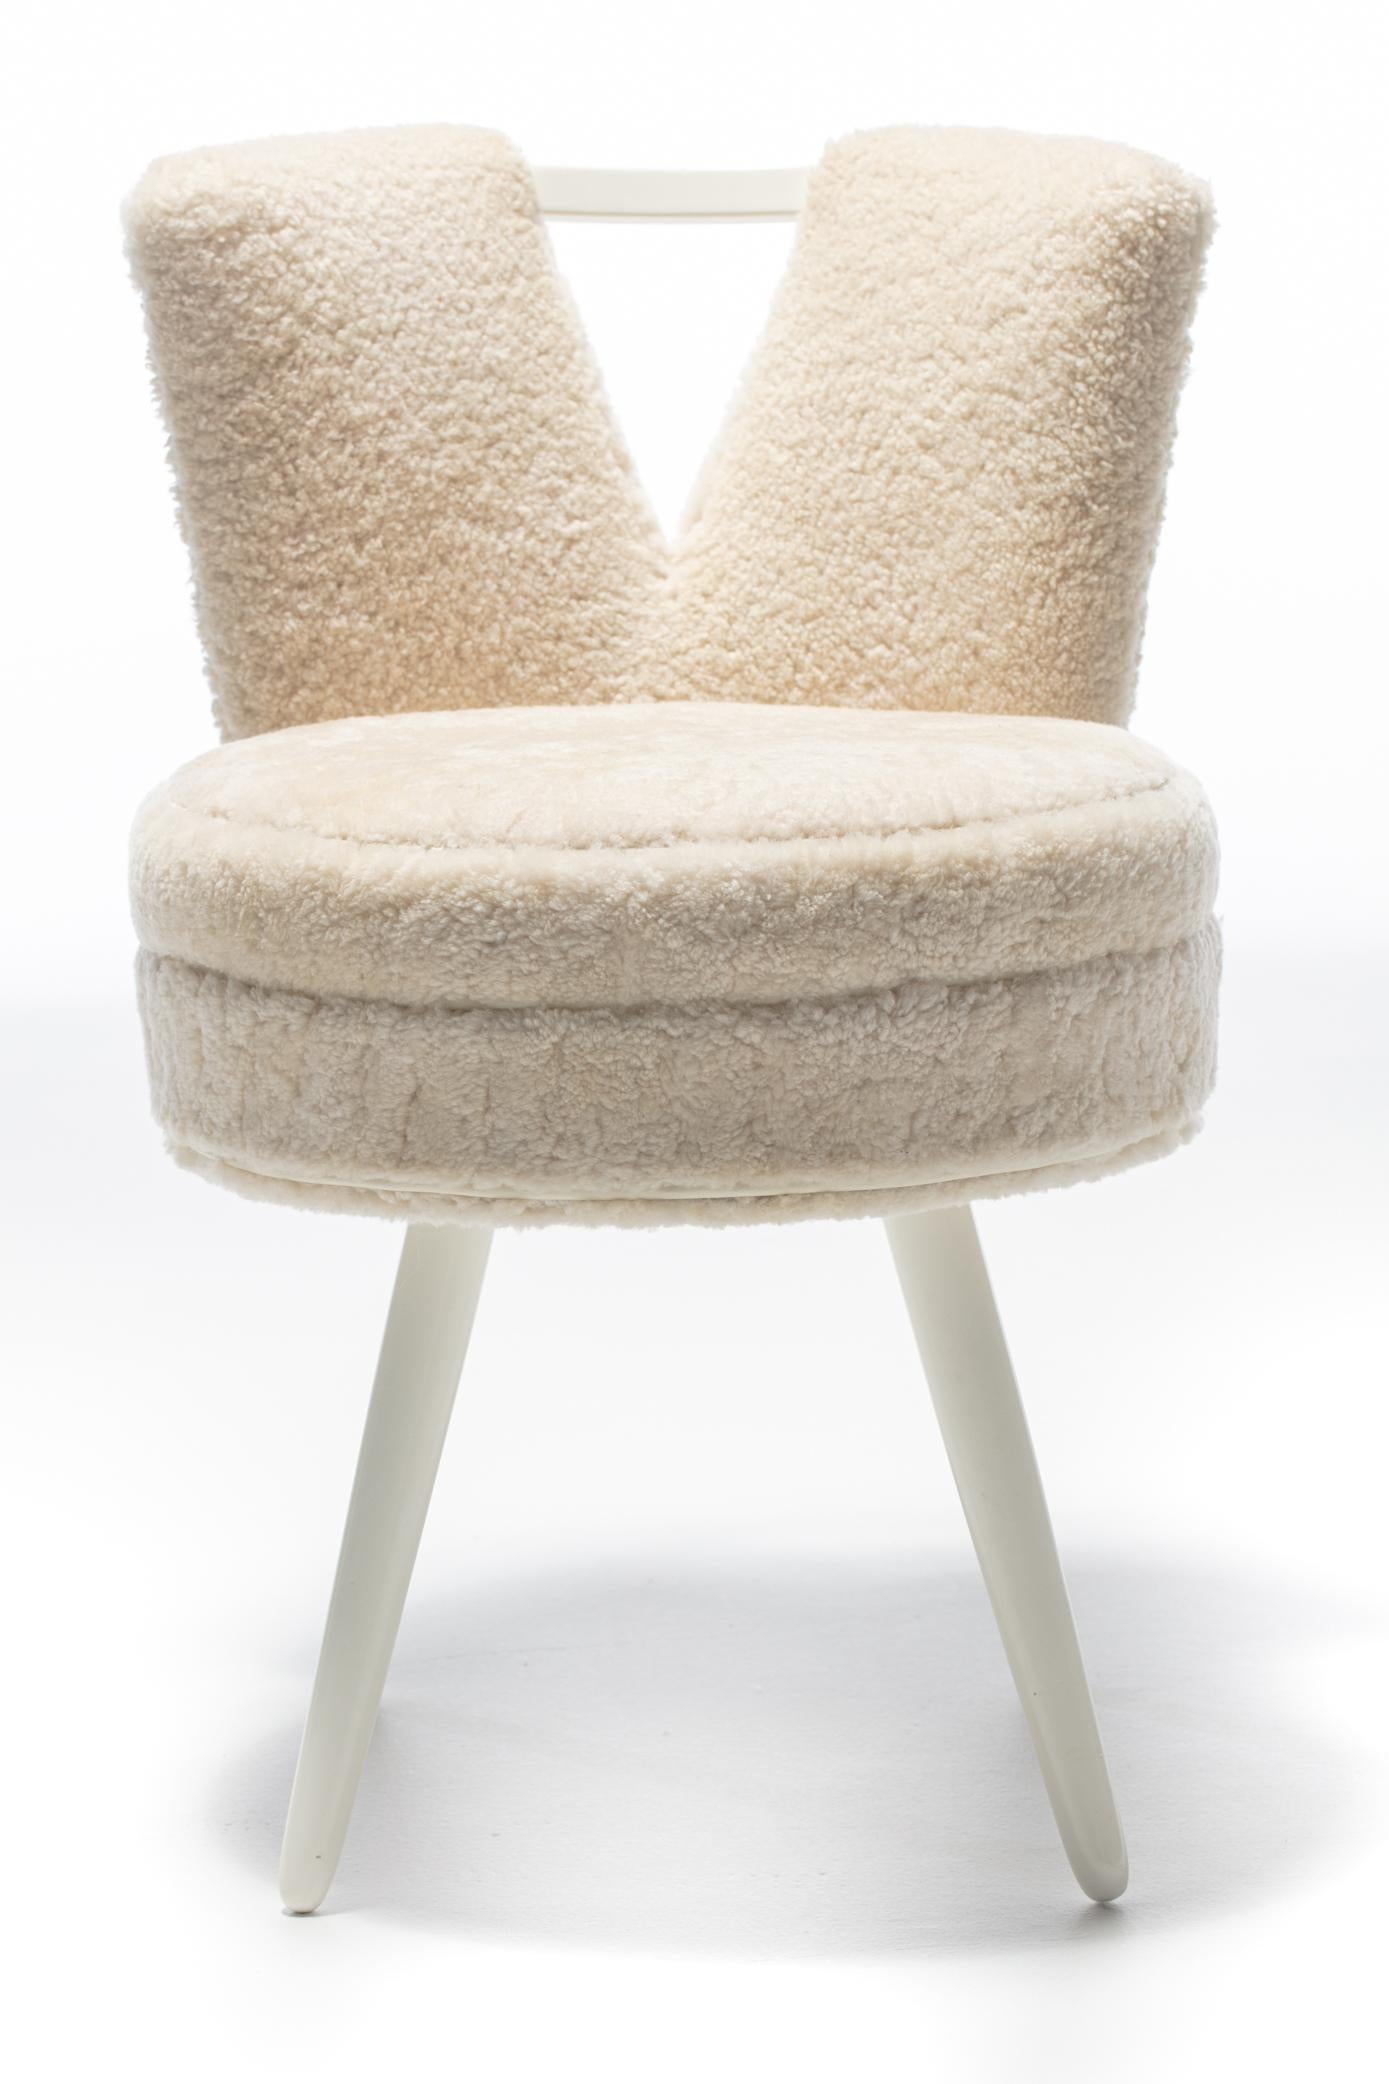 Custom Vanity Stool in Ivory Cream Shearling with Leather Trim 9